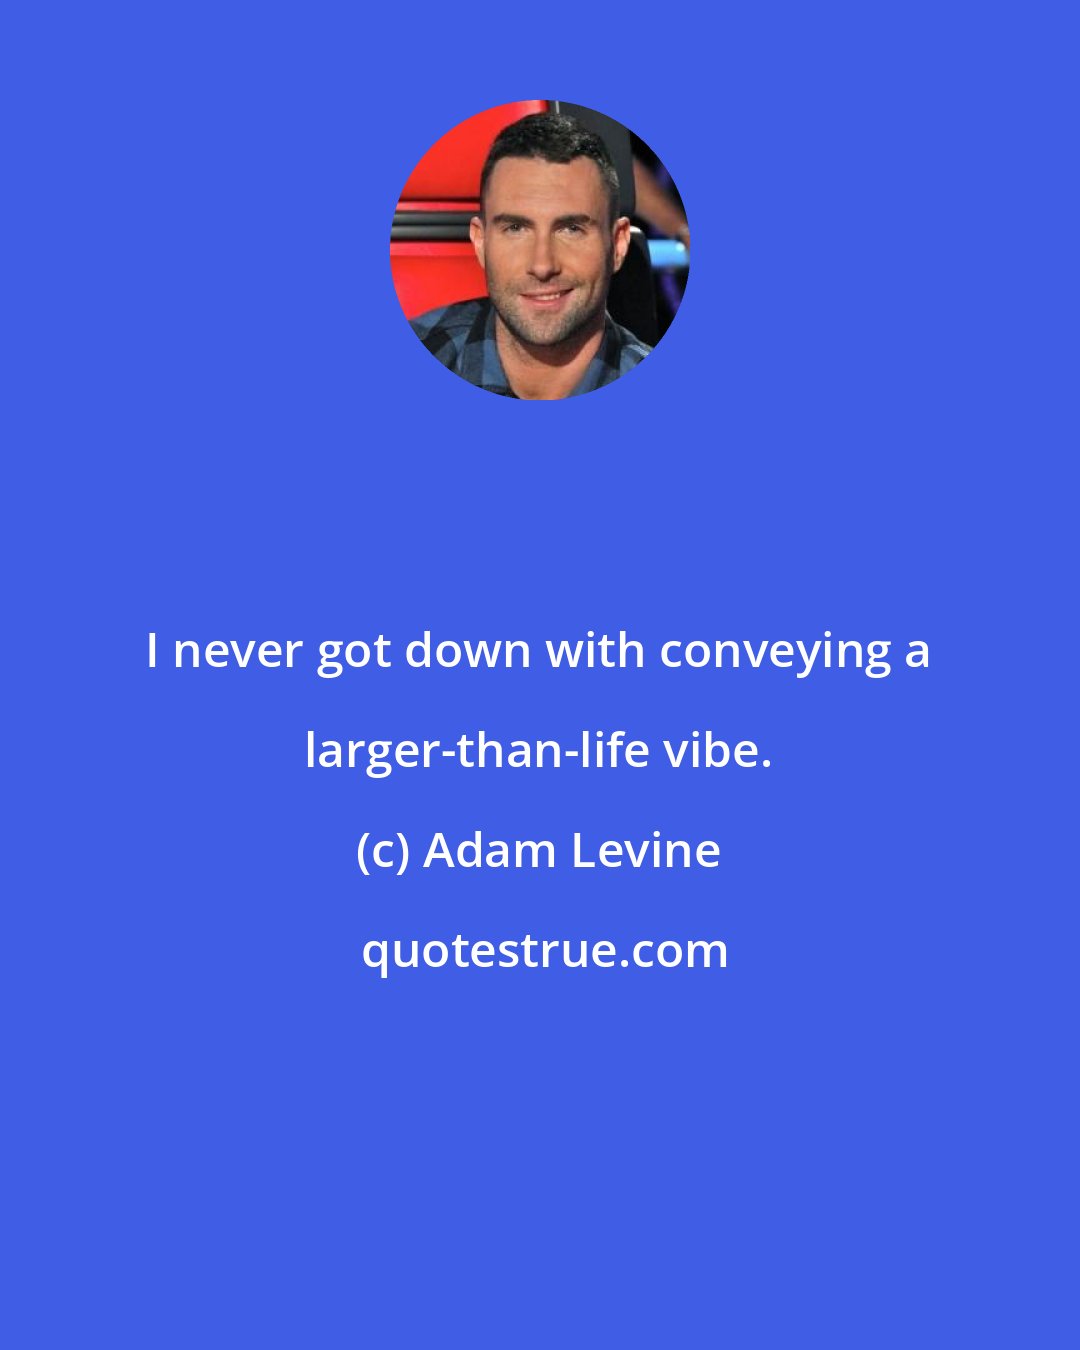 Adam Levine: I never got down with conveying a larger-than-life vibe.